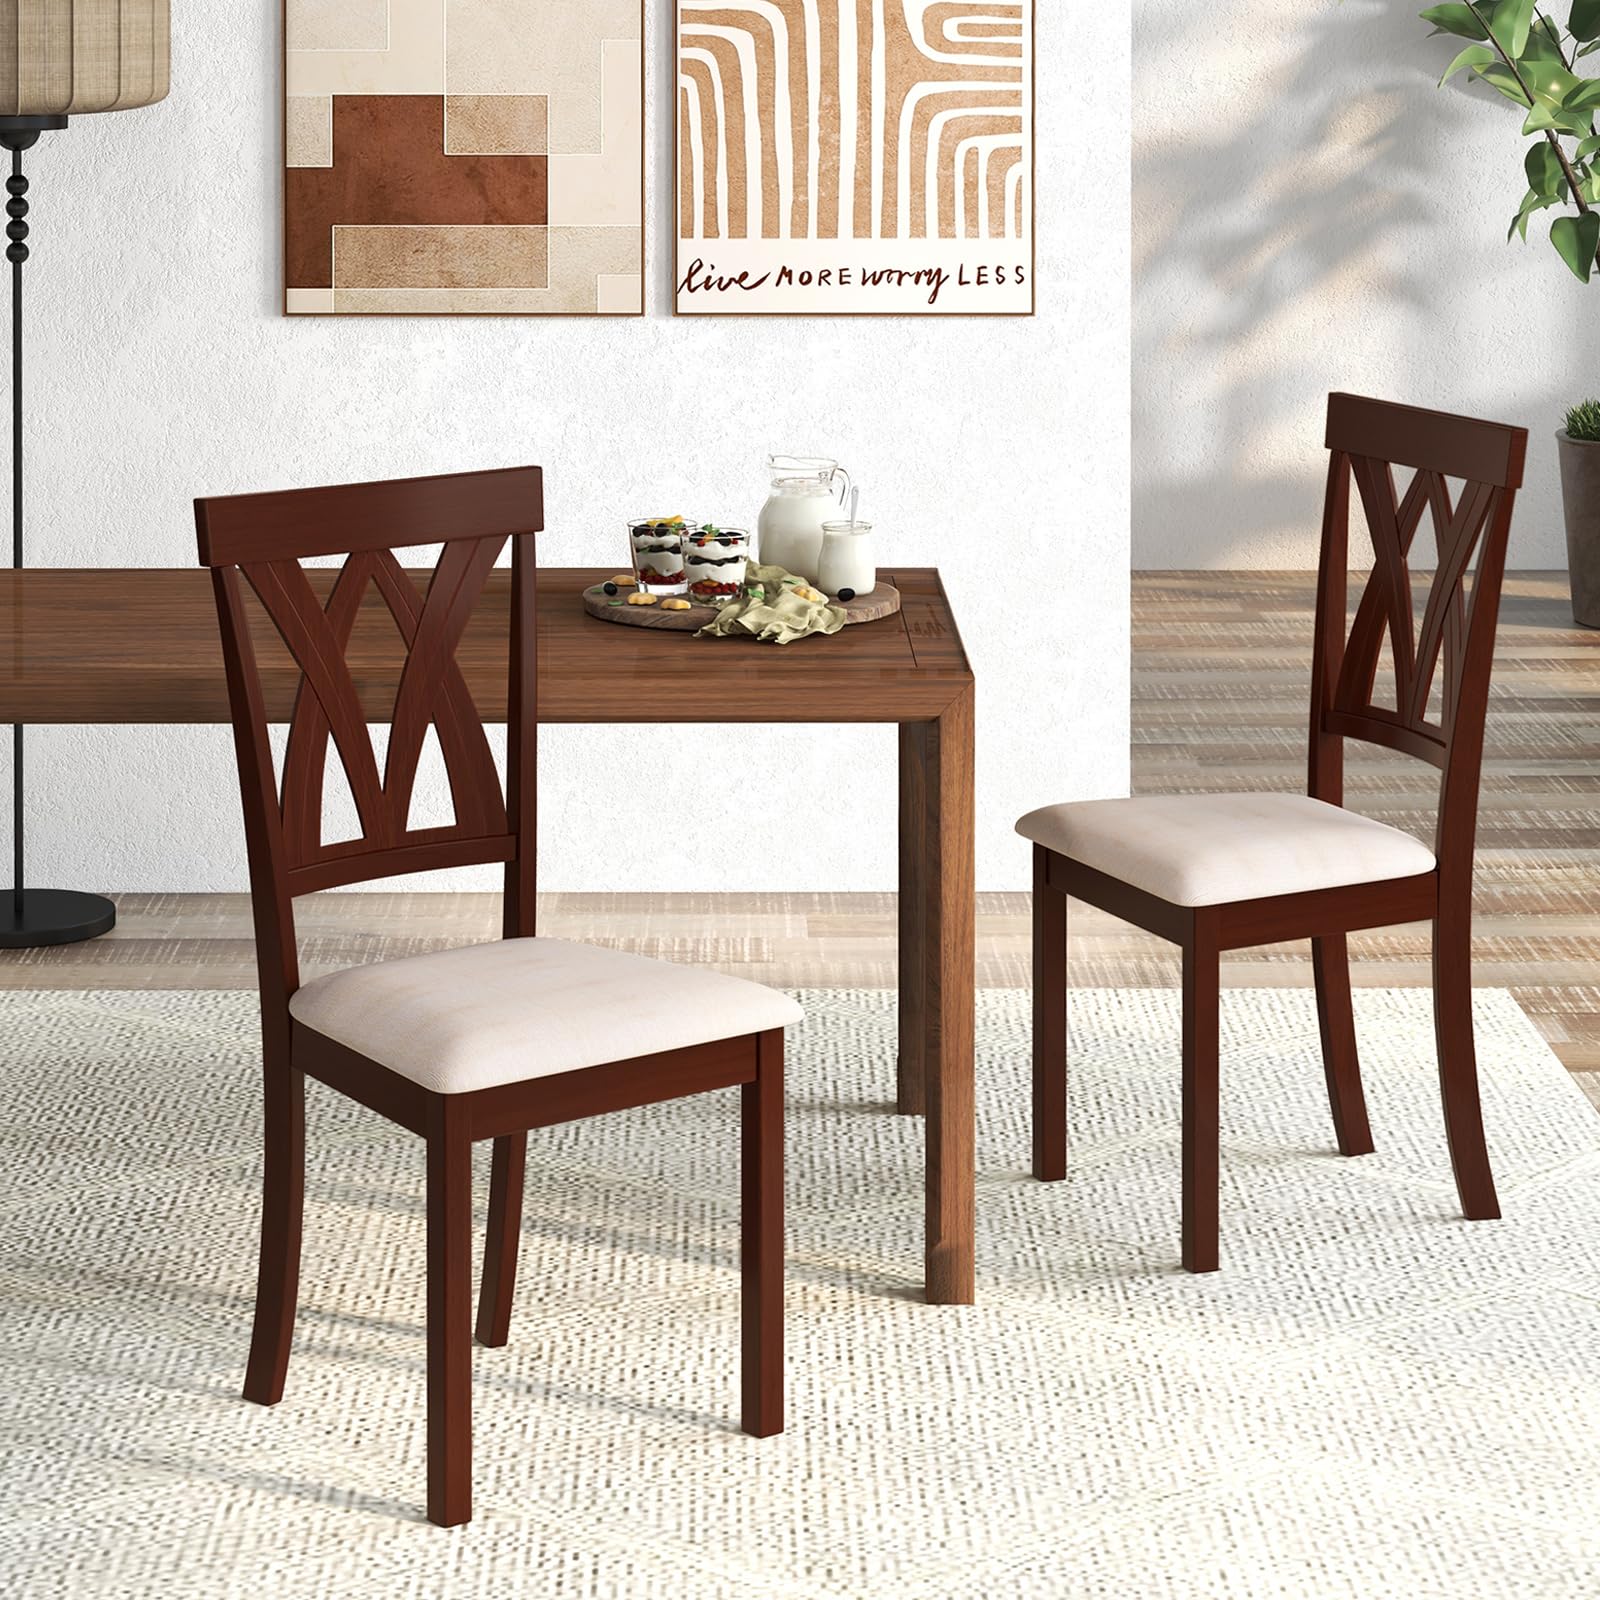 Giantex Wood Dining Chair, Wooden Kitchen Chairs with Upholstered Seat